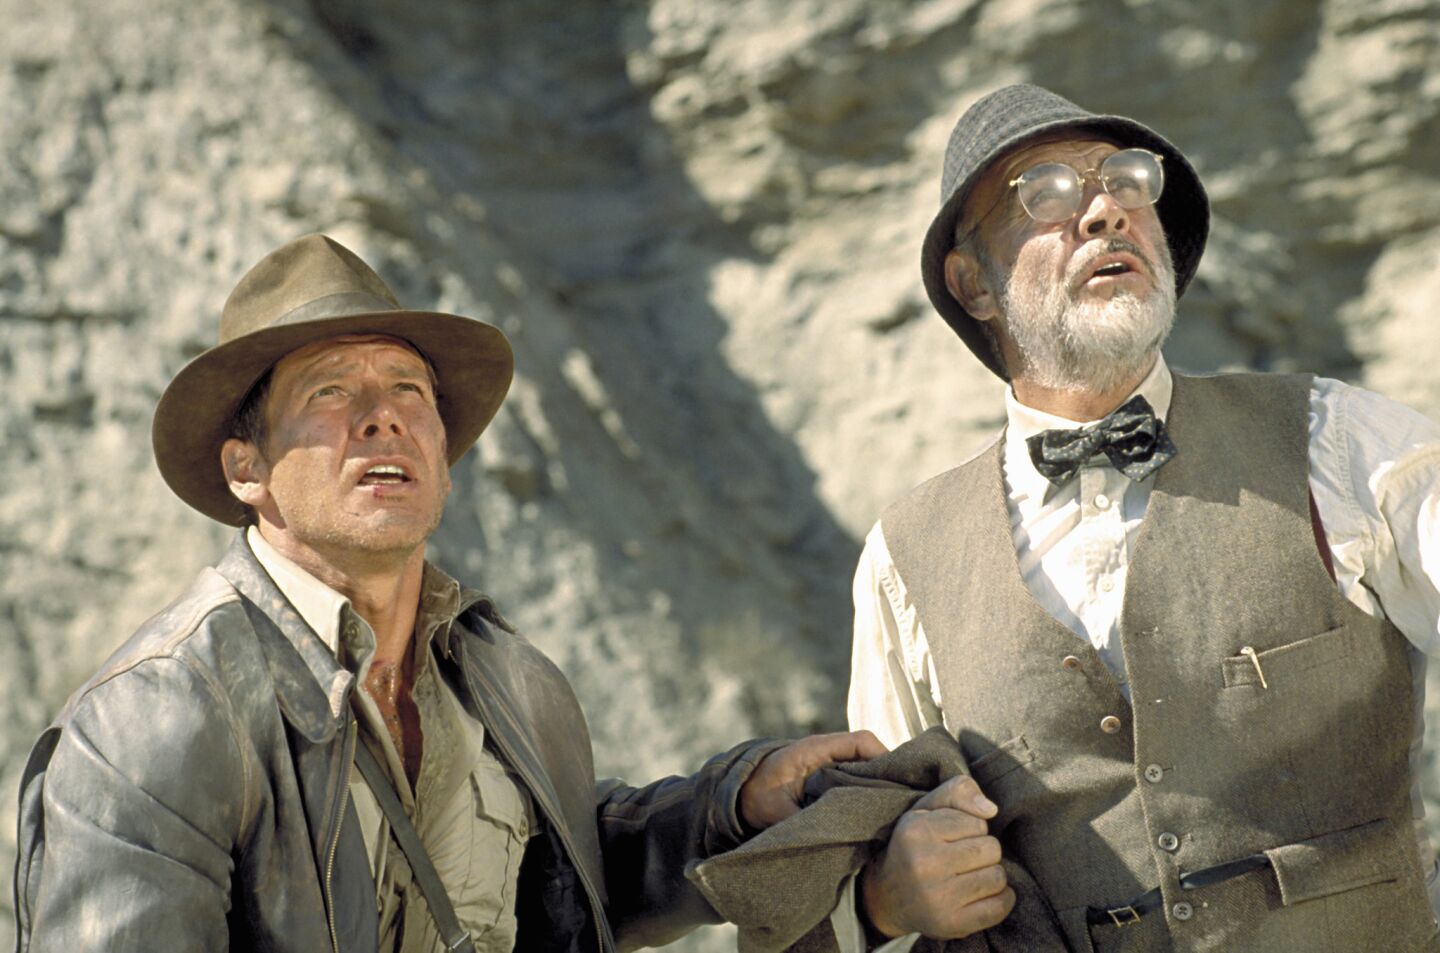 Connery, right, stars with Harrison Ford in the 1989 film "Indiana Jones and the Last Crusade."